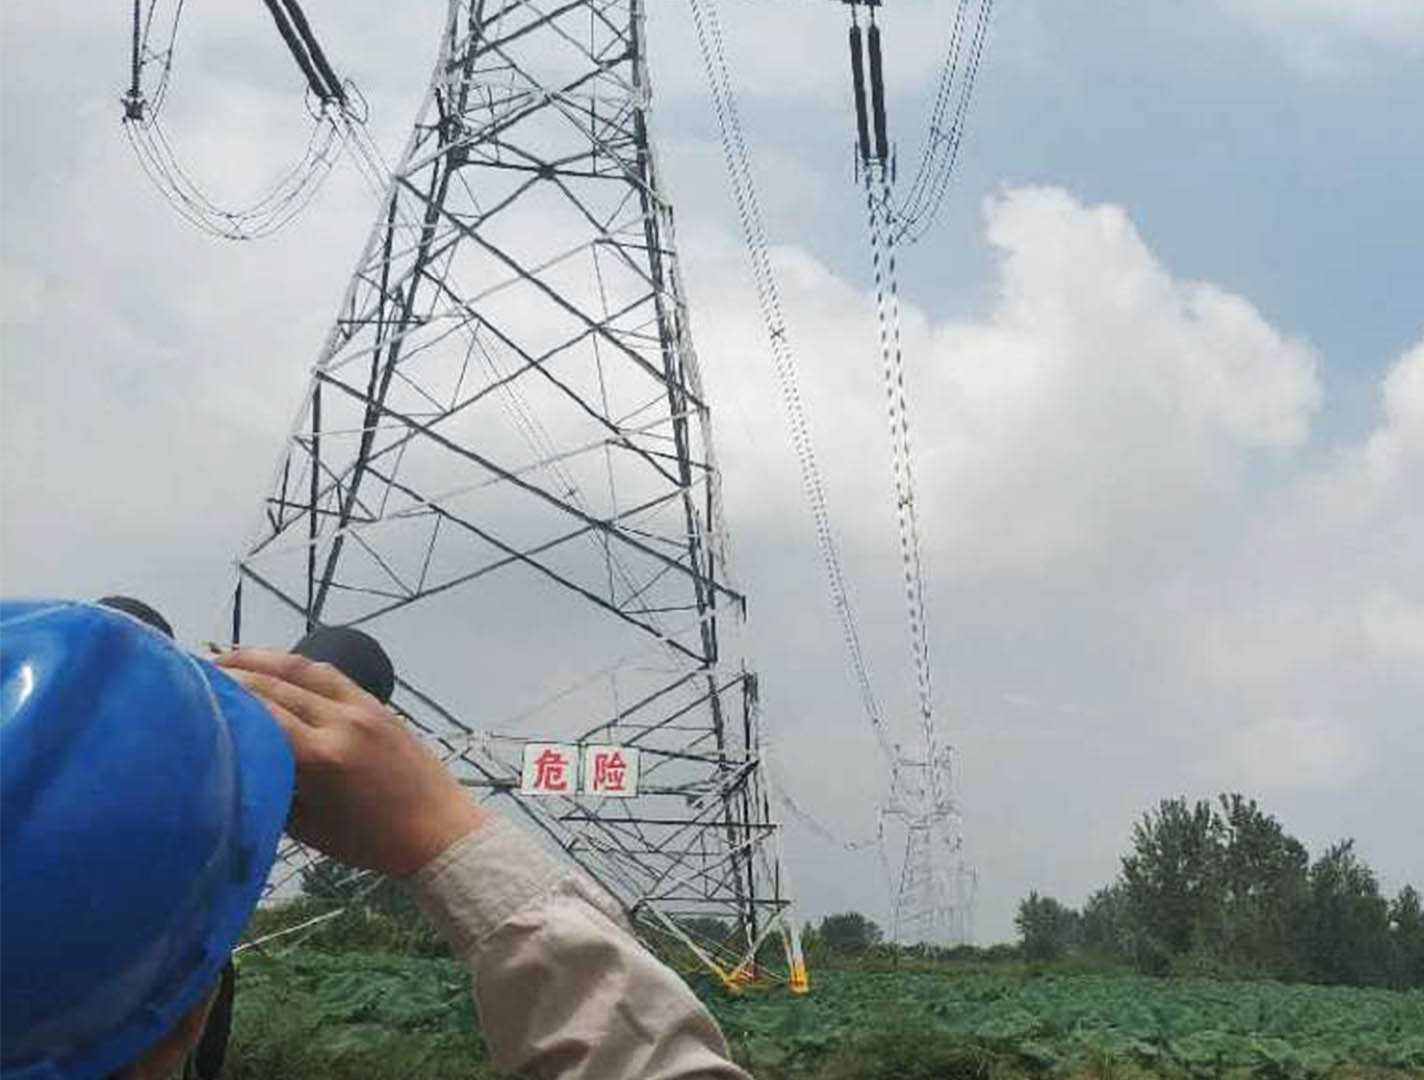 Application of outdoor thermal transfer sign in power transmission line